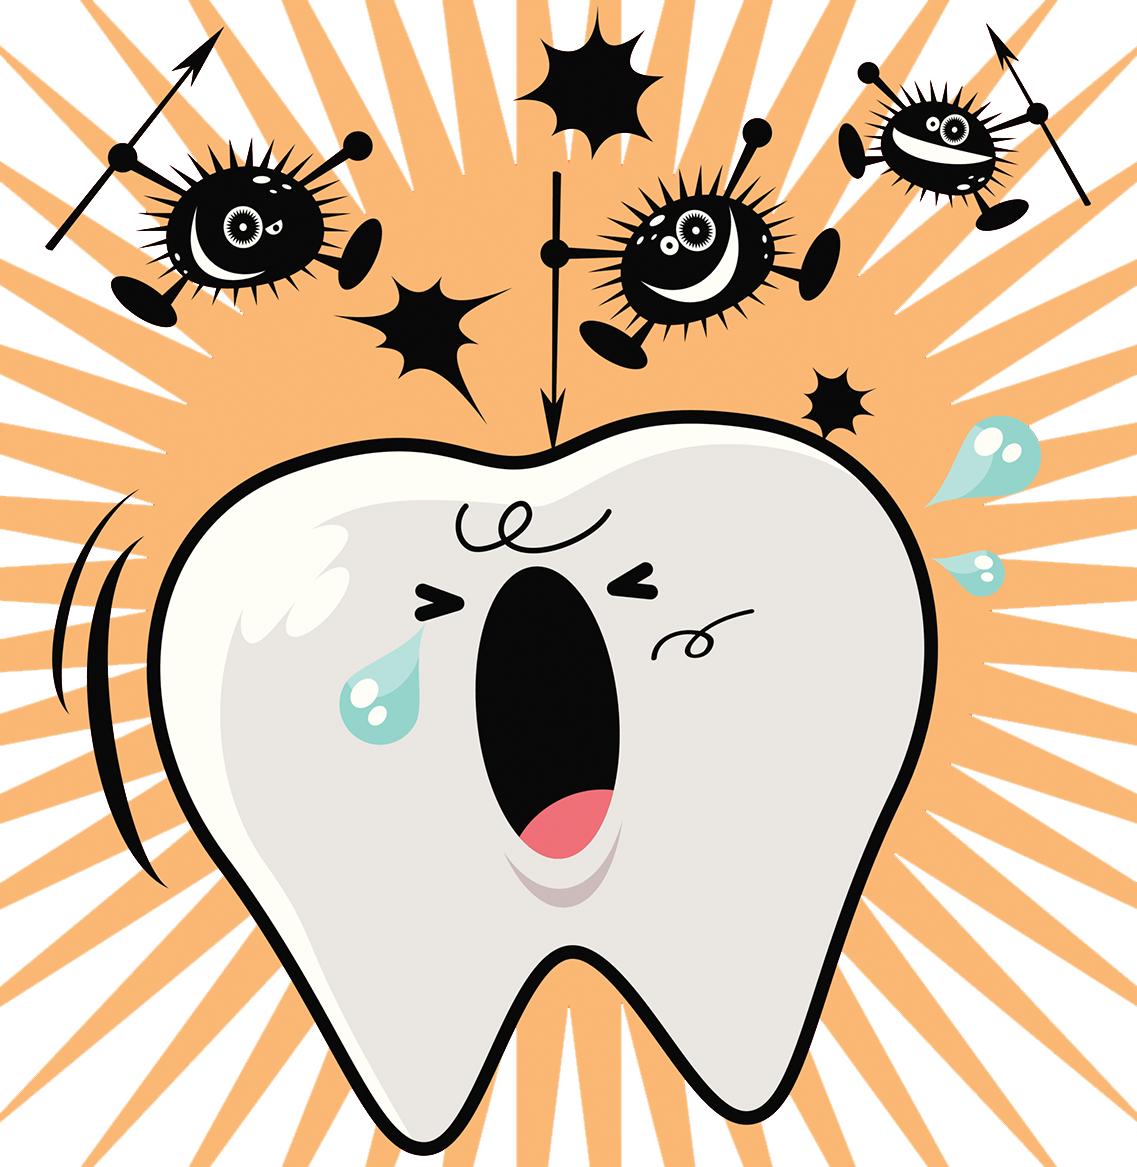 Toothache Photography Illustration - Toothache Photography Illustration (1137x1167)